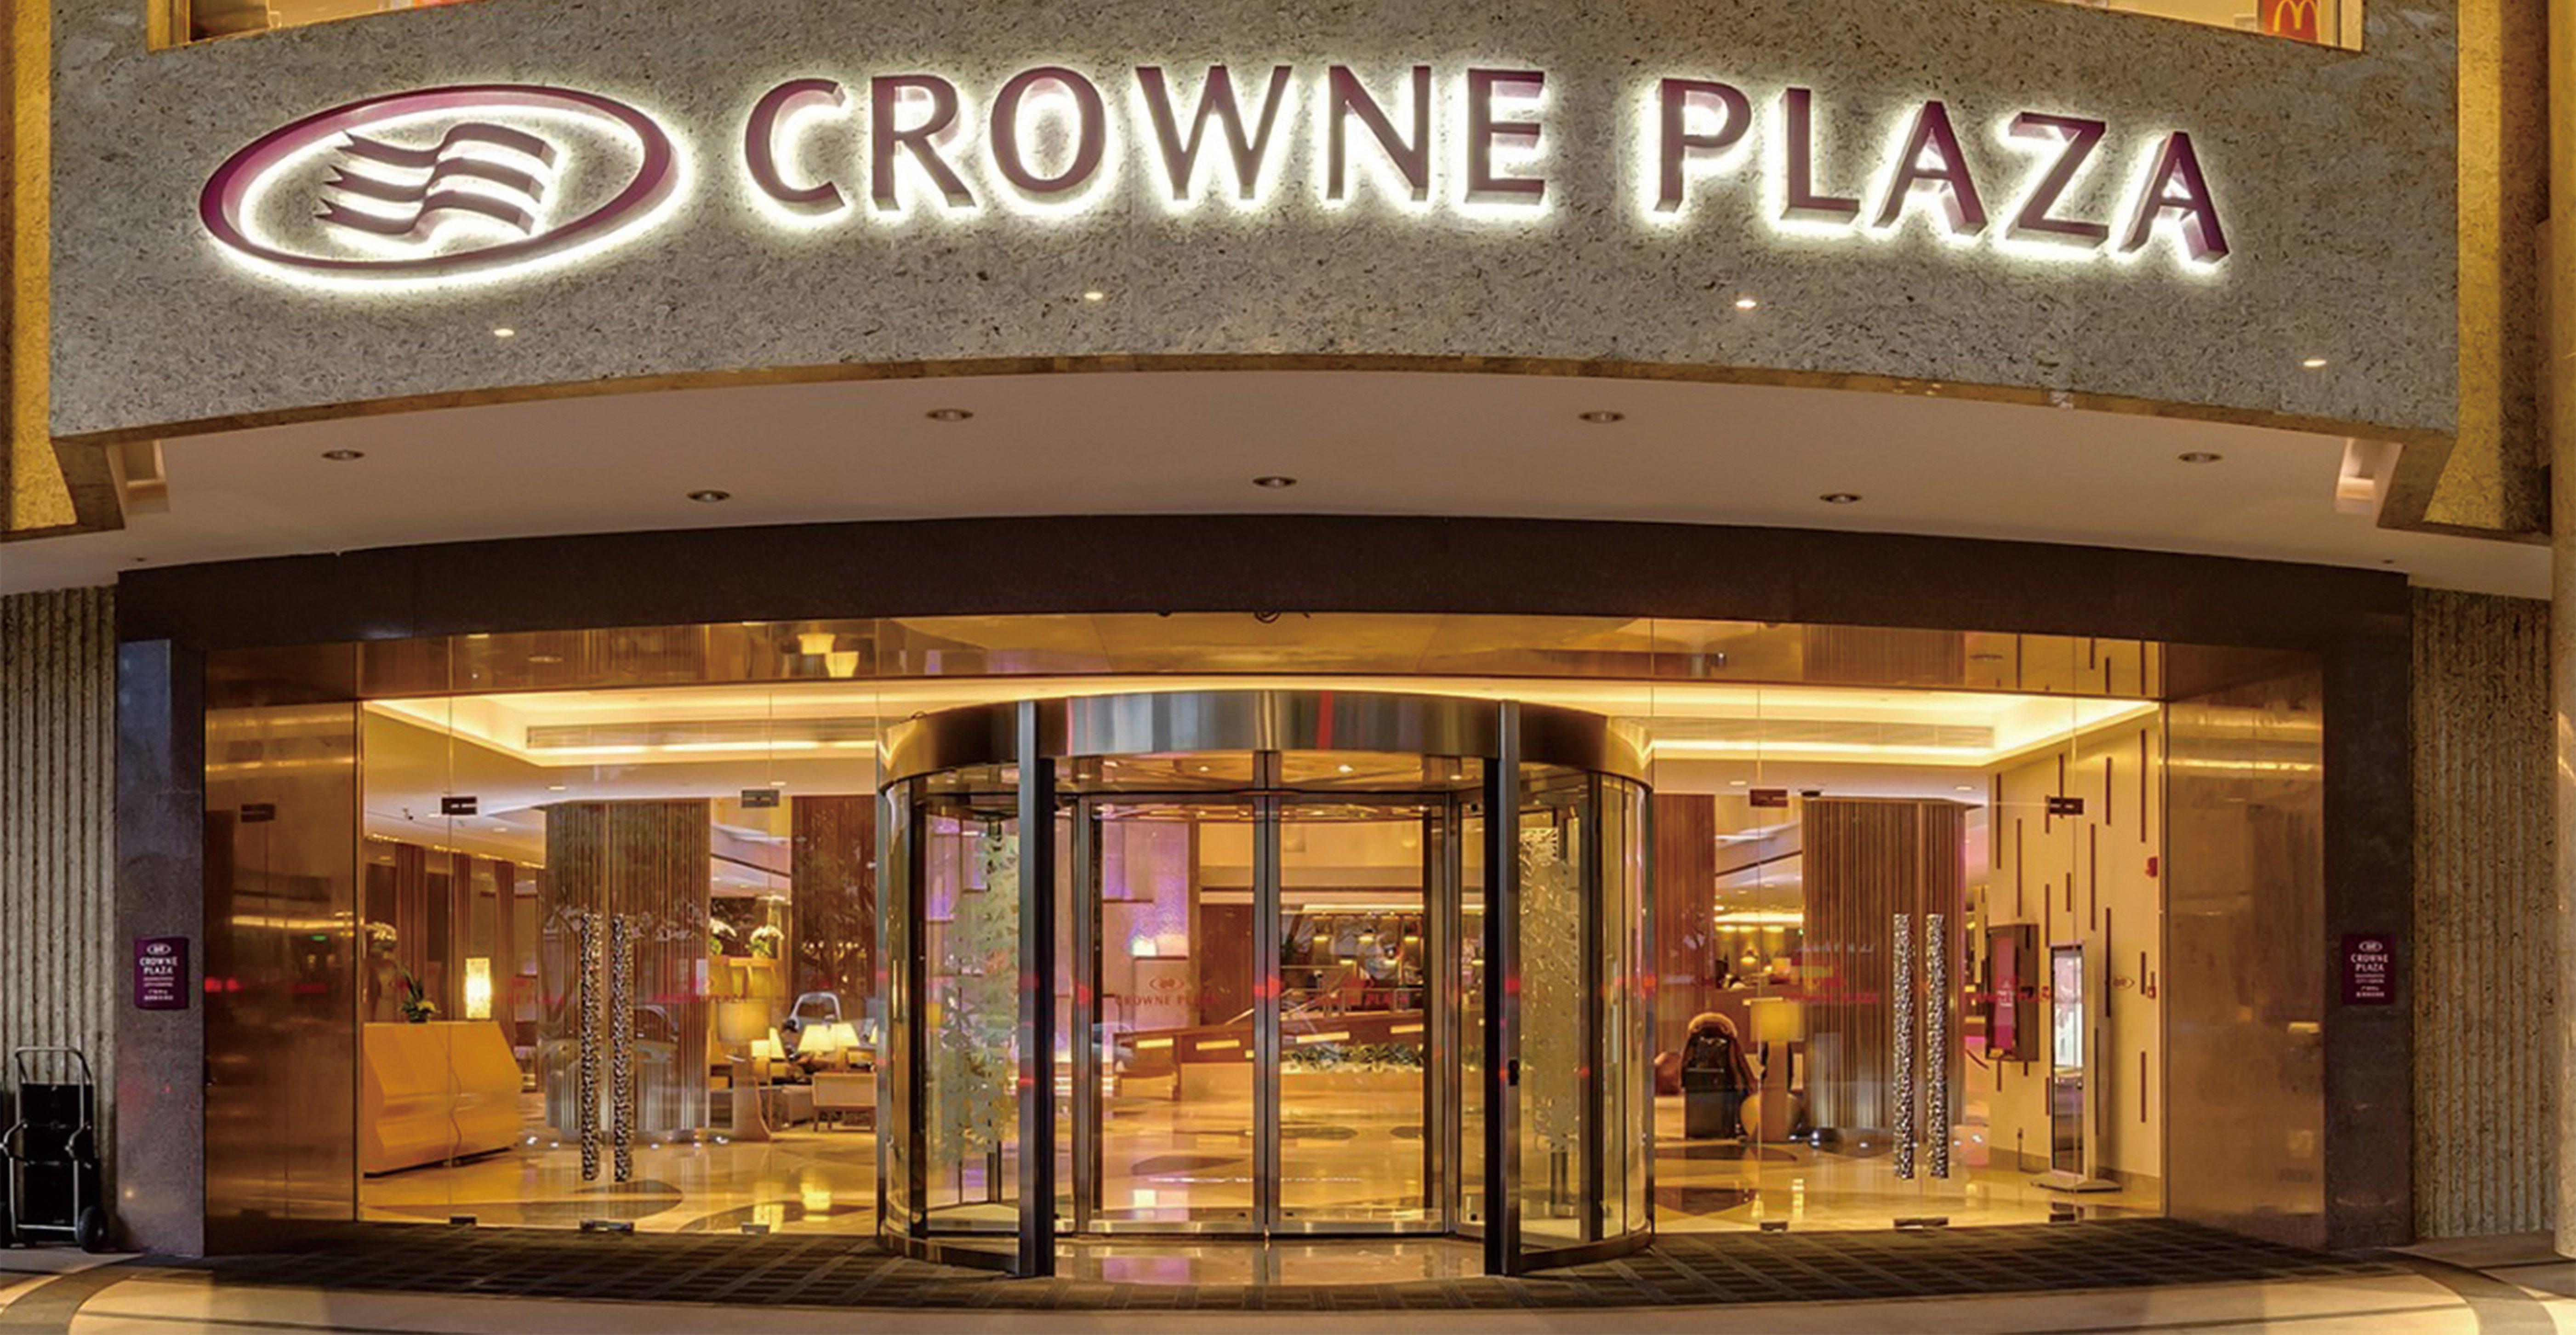 Crowne Plaza Guangzhou City Centre, An Ihg Hotel - Free Canton Fair Shuttle Bus And Registration Counter Экстерьер фото